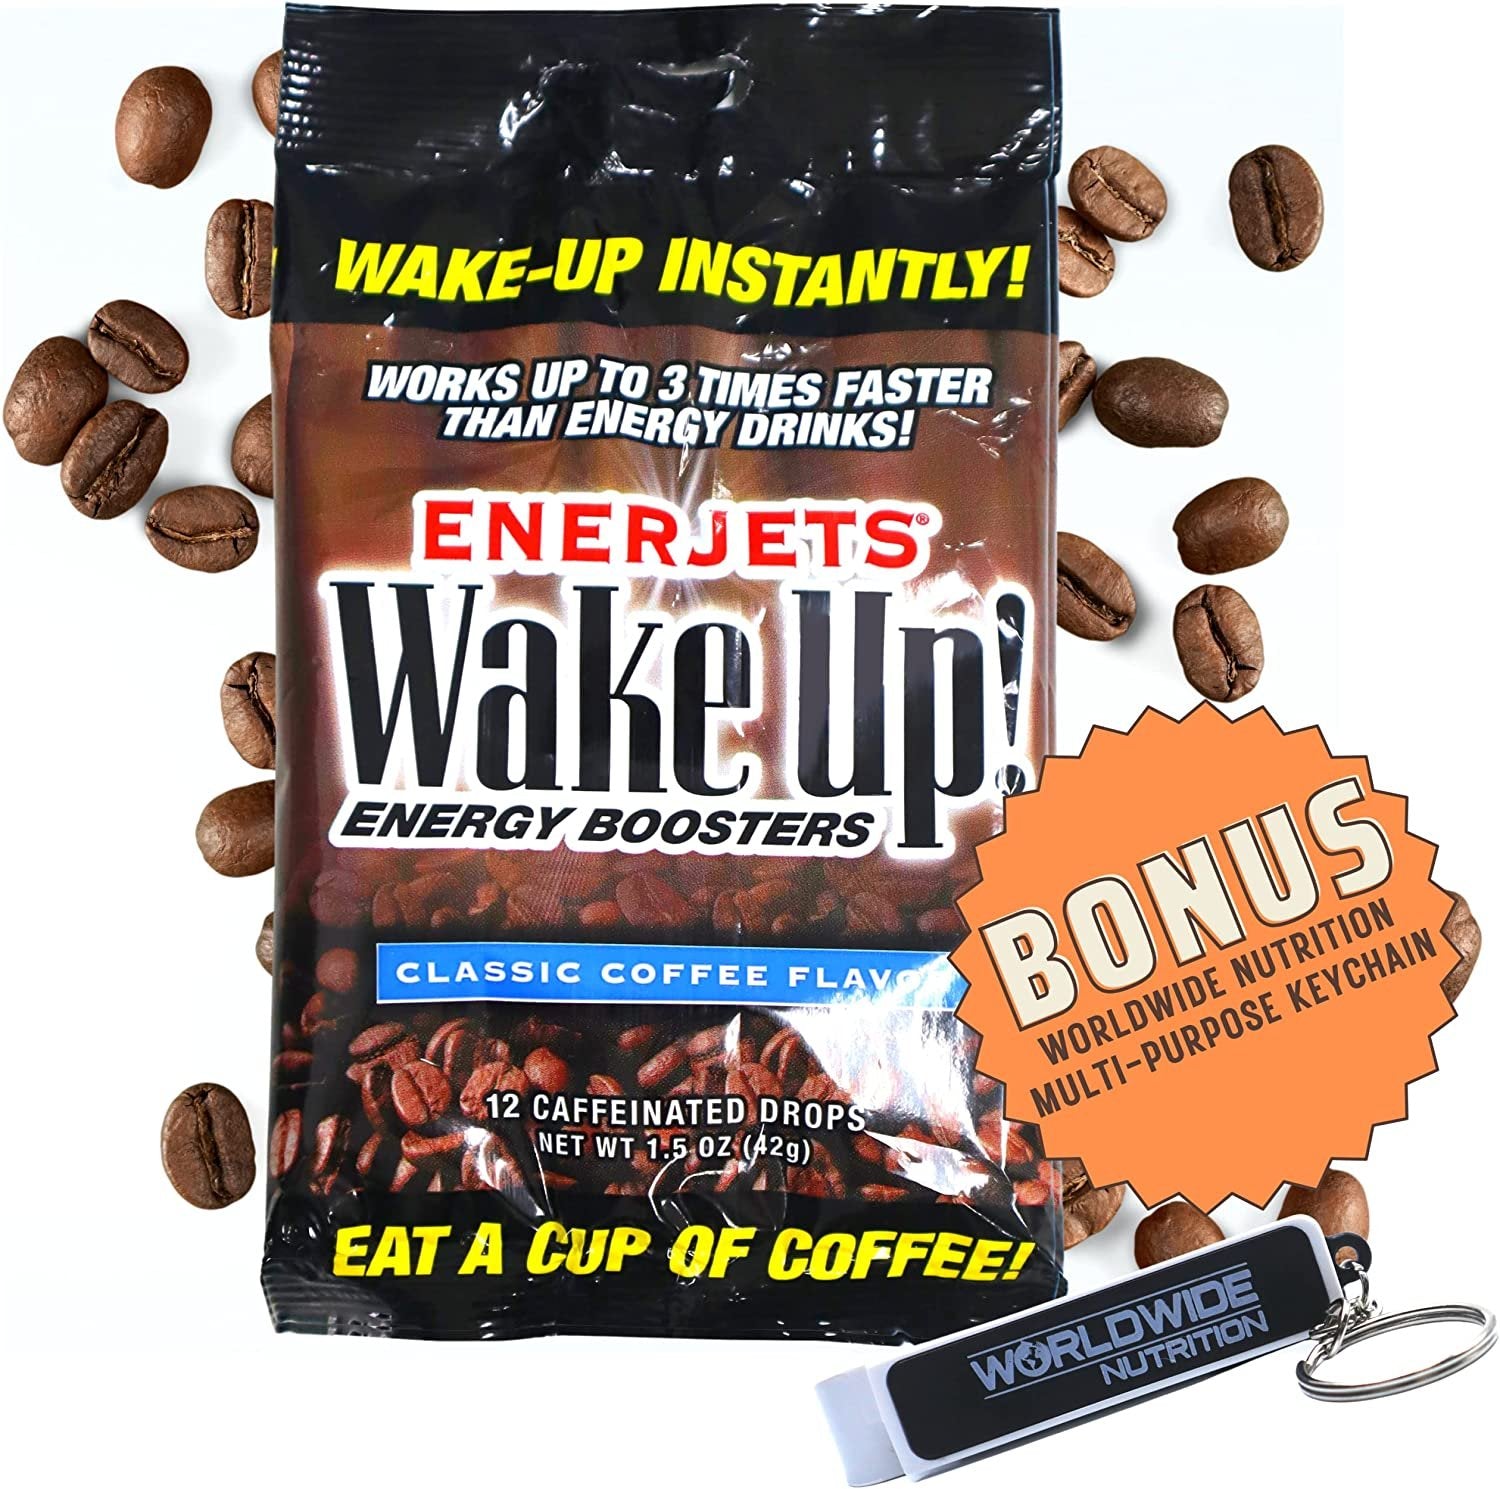 Enerjets Wake Up Energy Booster Caffeinated Drops - Instant Coffee Energy Supplements - Classic Coffee Flavor - Pack of 12, 12 Drops Per Package with Worldwide Nutrition Multi Purpose Key Chain